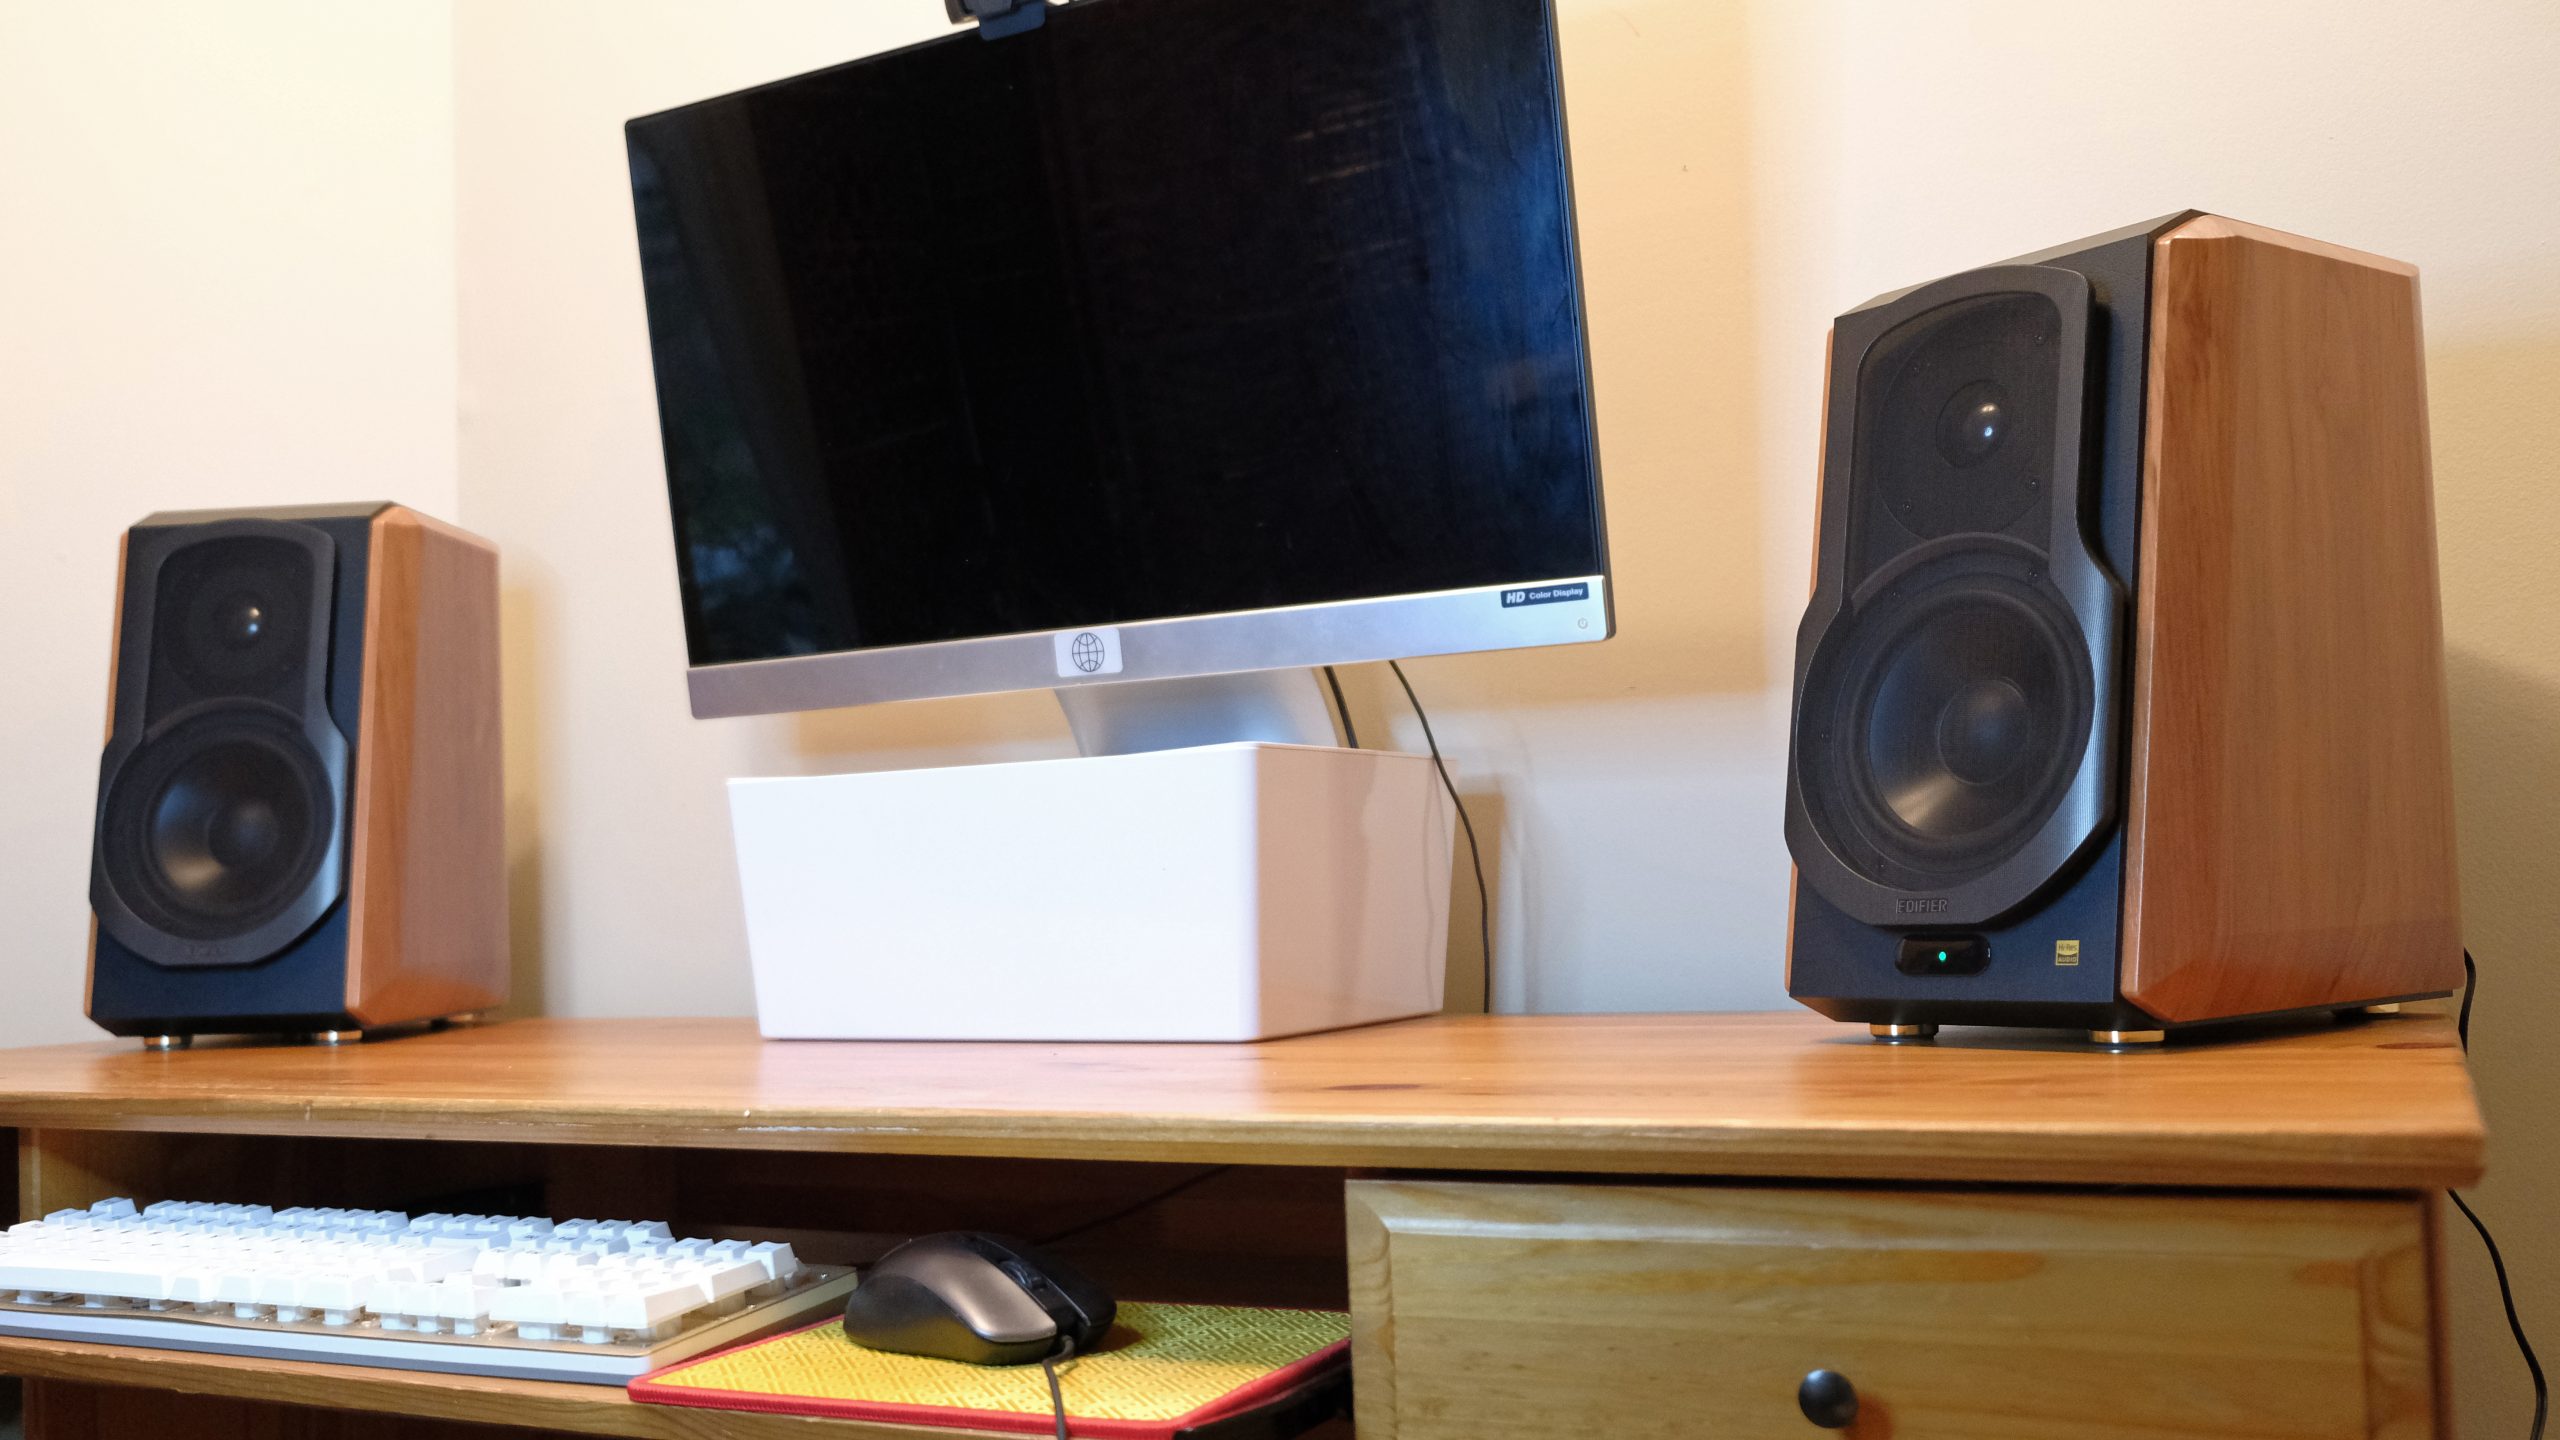 The Edifier S1000W speakers sit on a wood desk with a computer monitor in the middle.